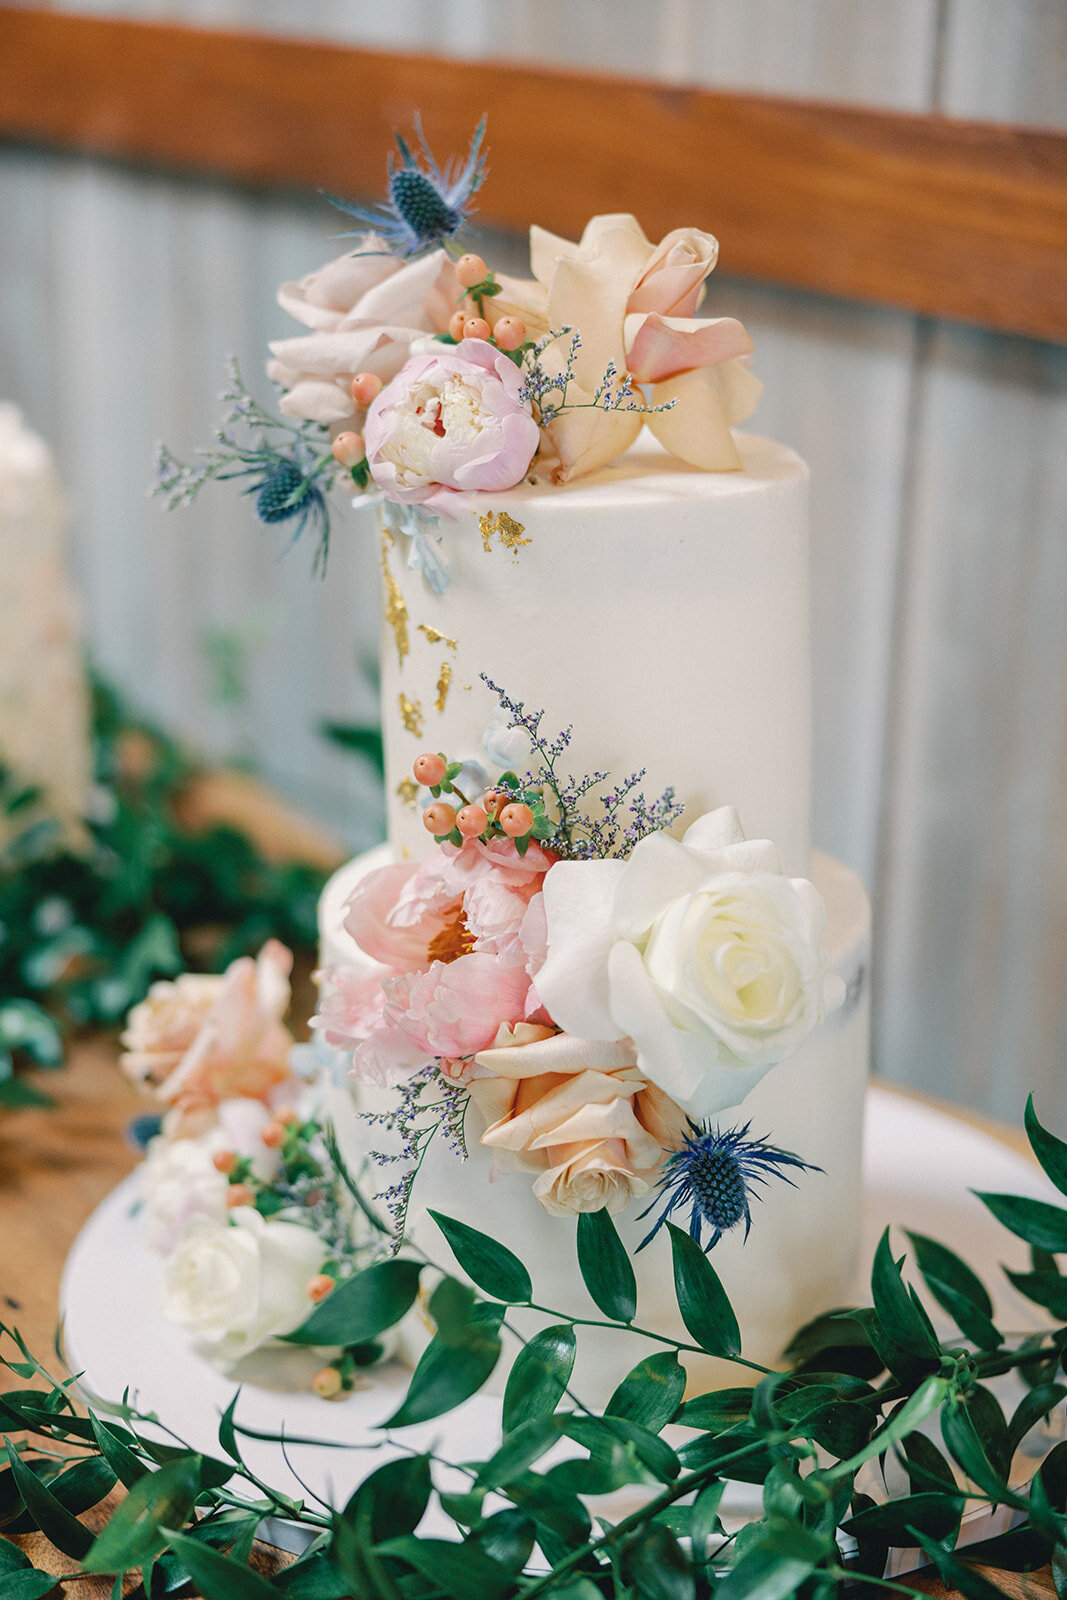 White tiered cake with pink and white flowers and greenery